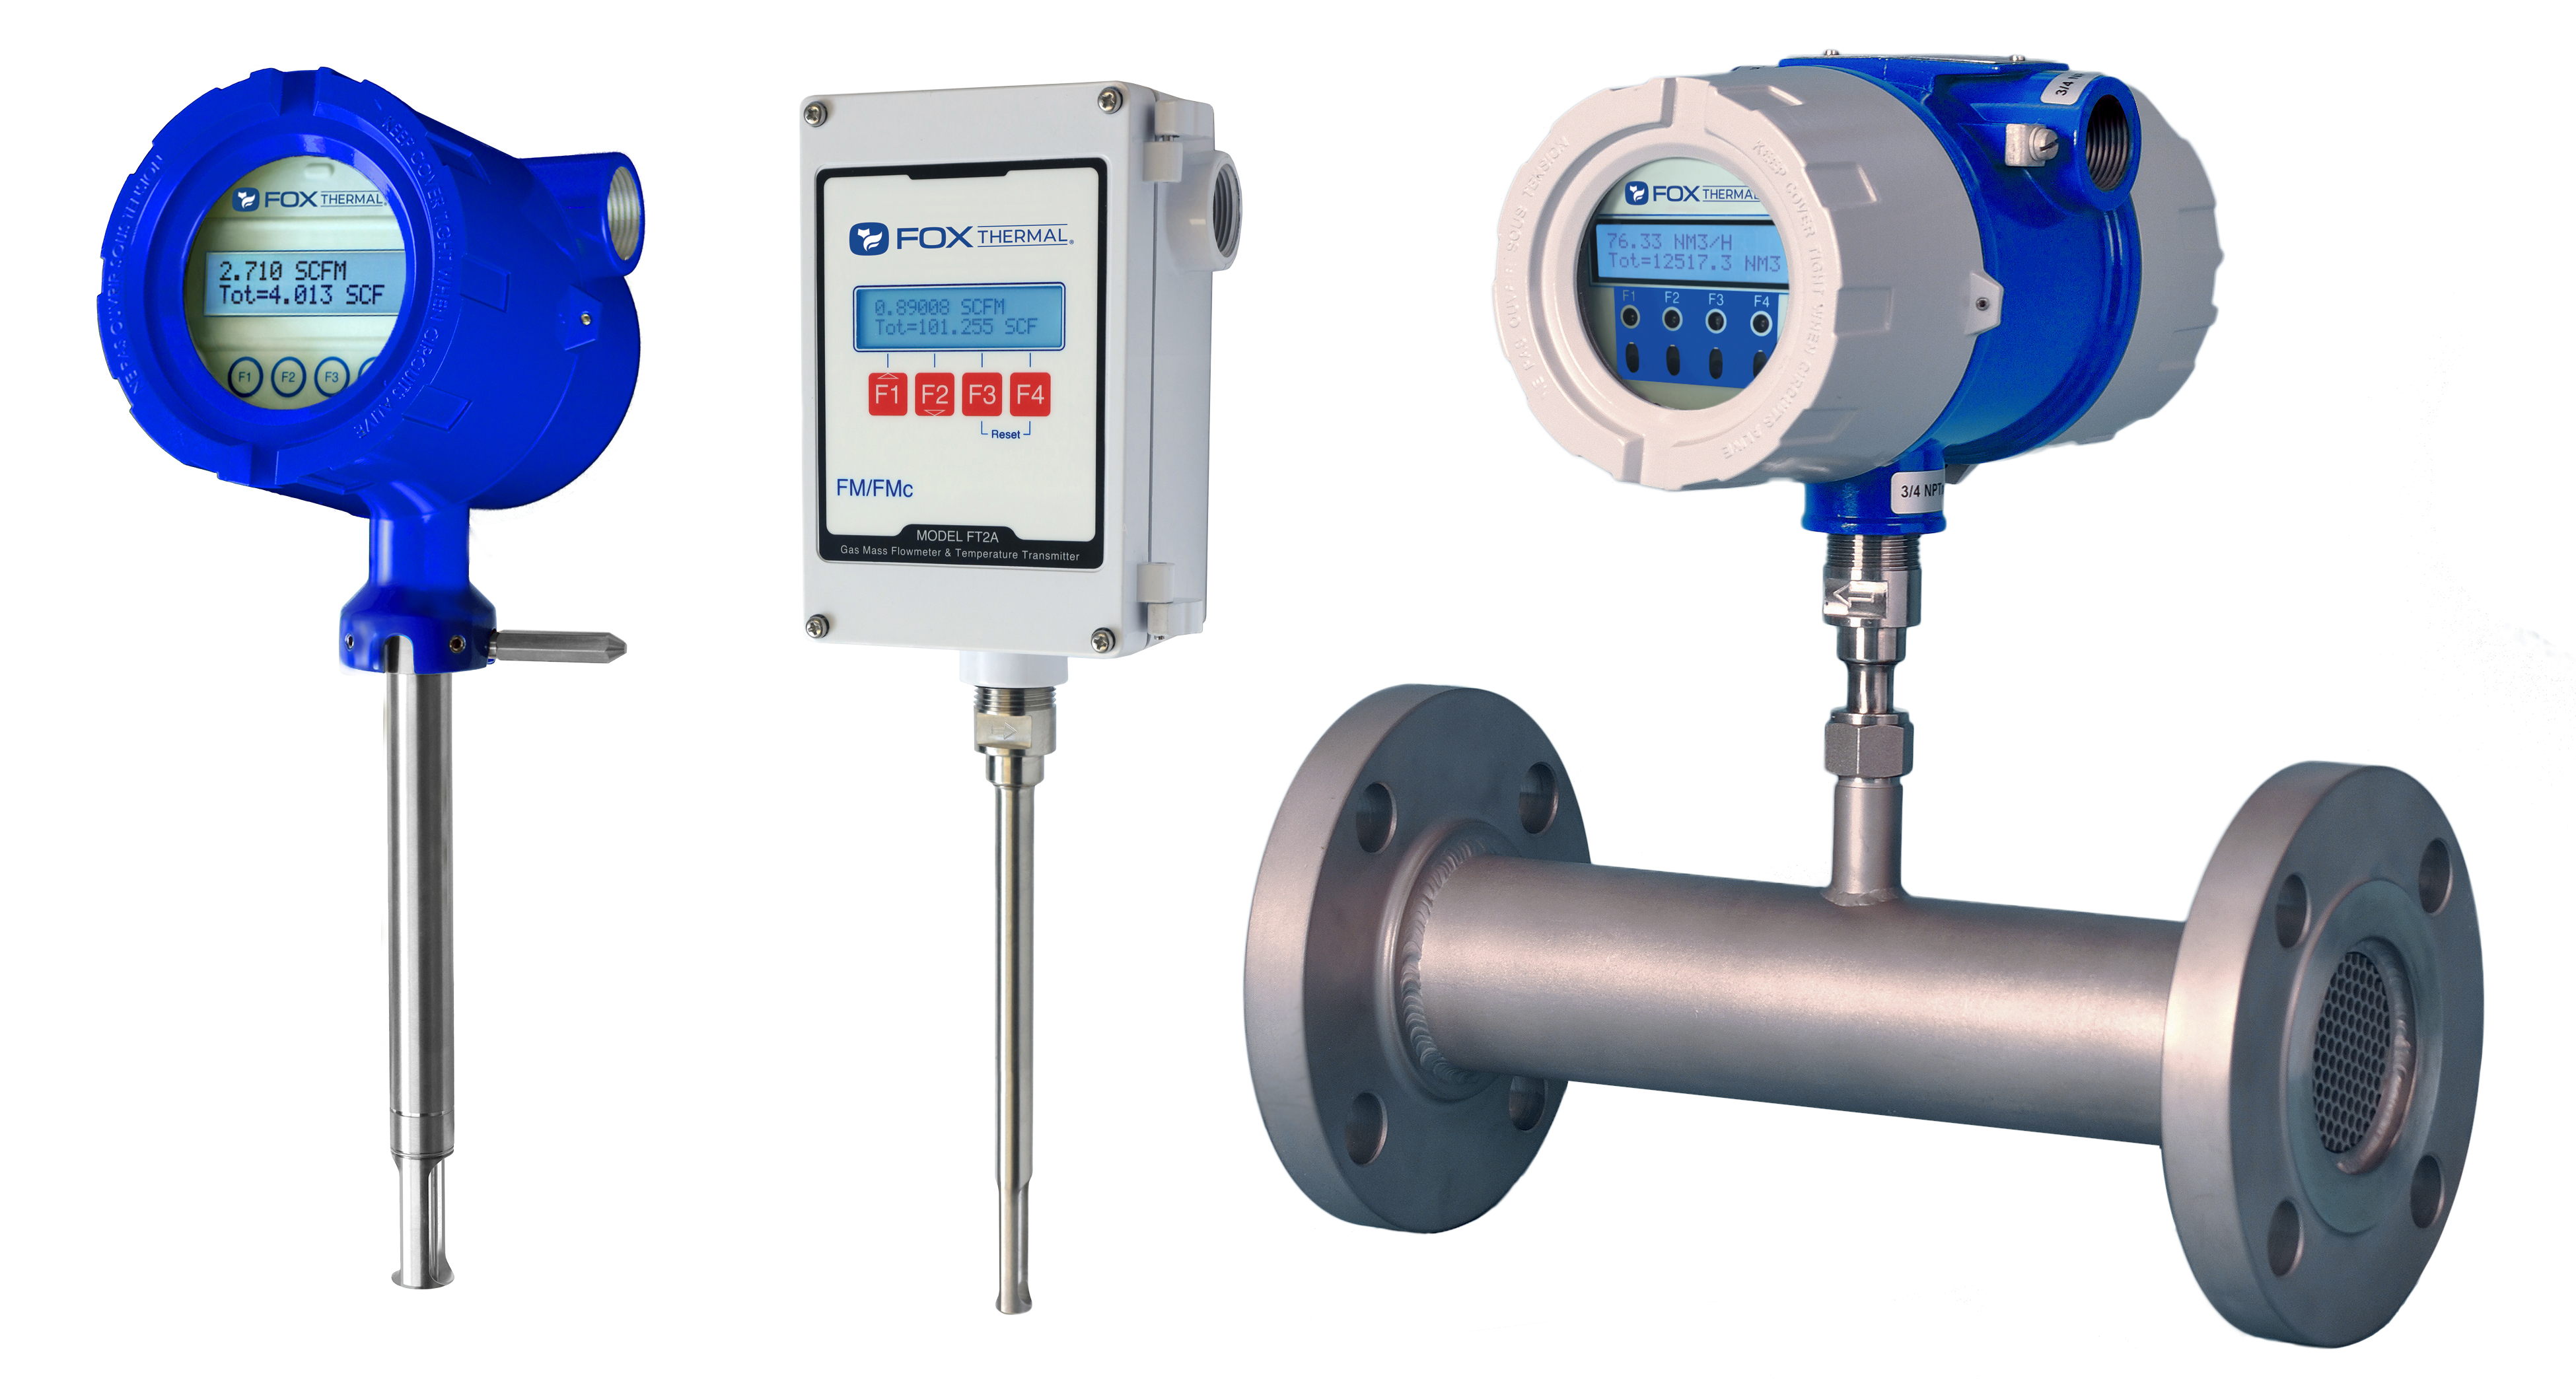 Overview of several thermal flowmeters from Fox Thermal.